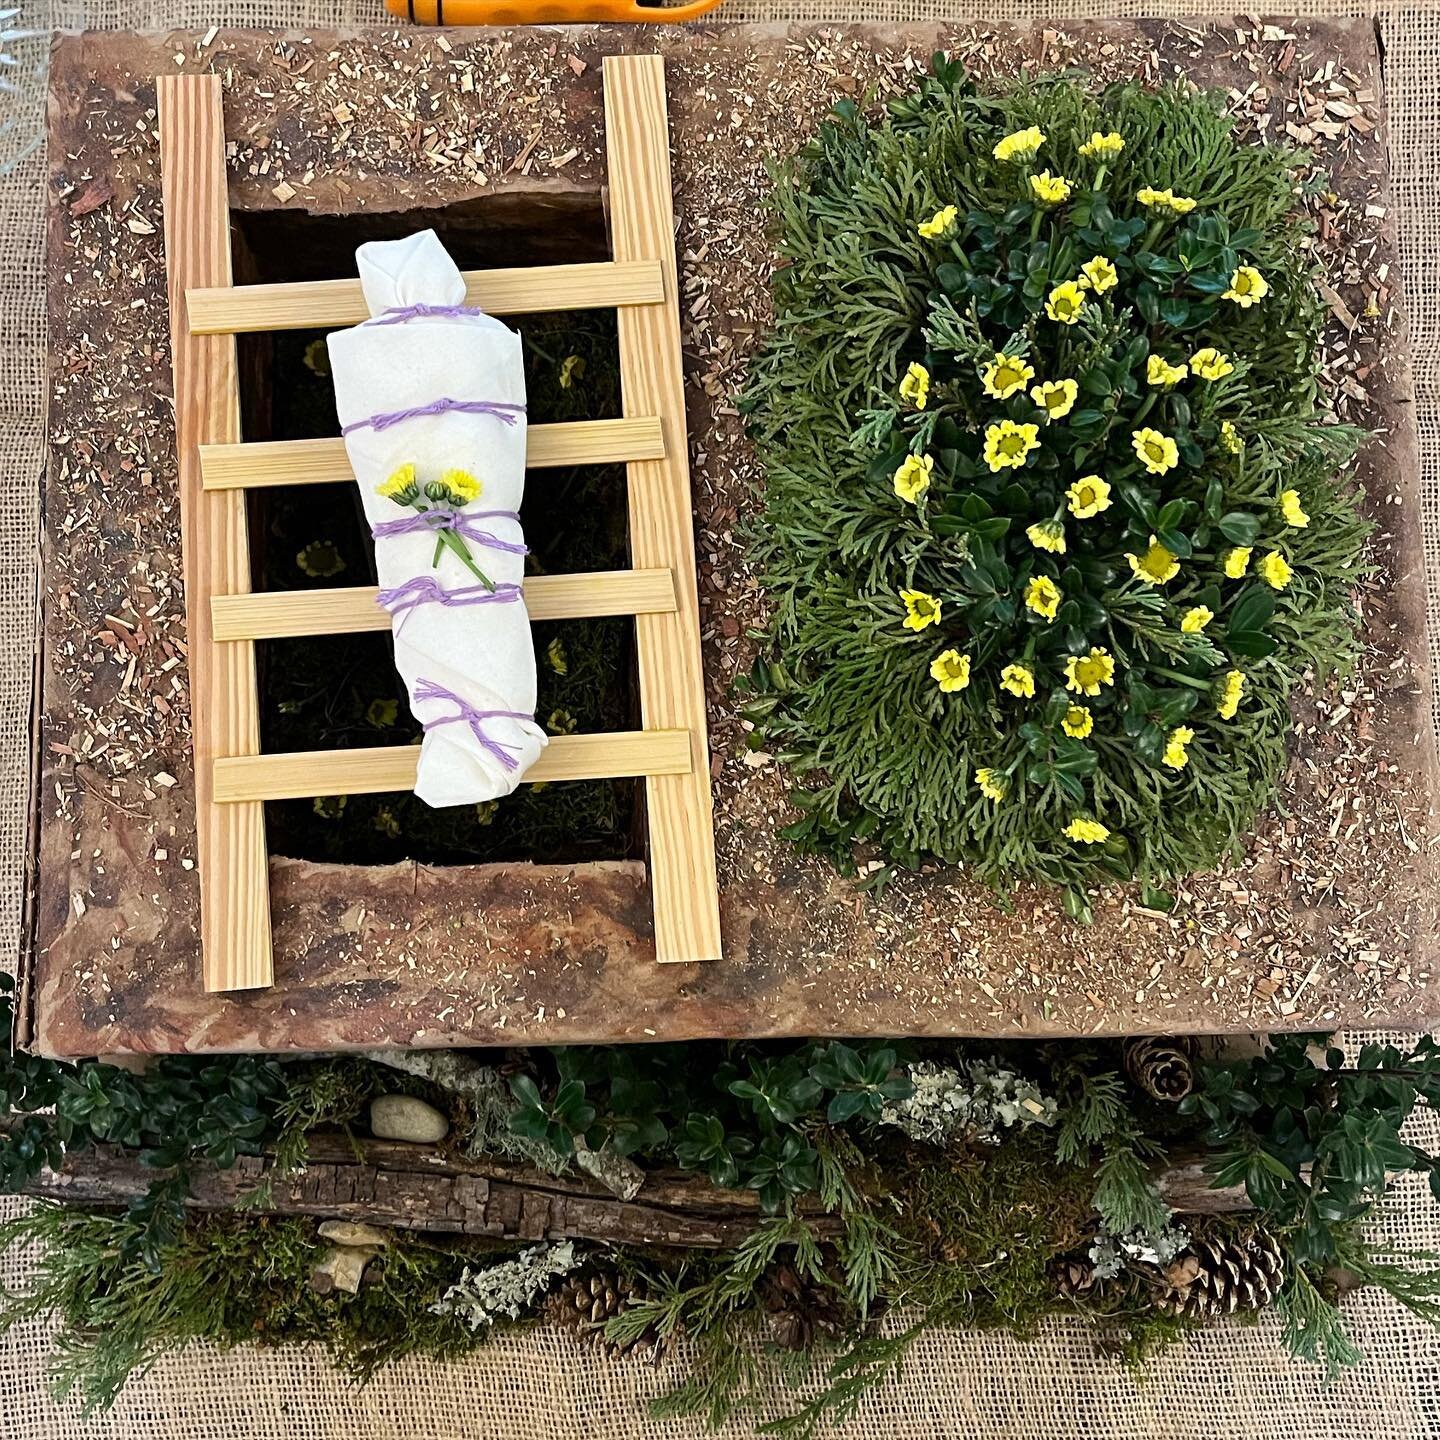 One imagining of what a green burial could look like. This represents the moment after the shrouded body has been carried to the grave and before it is lowered. Time for the graveside service and final goodbyes. 

We loved this amazing green burial m